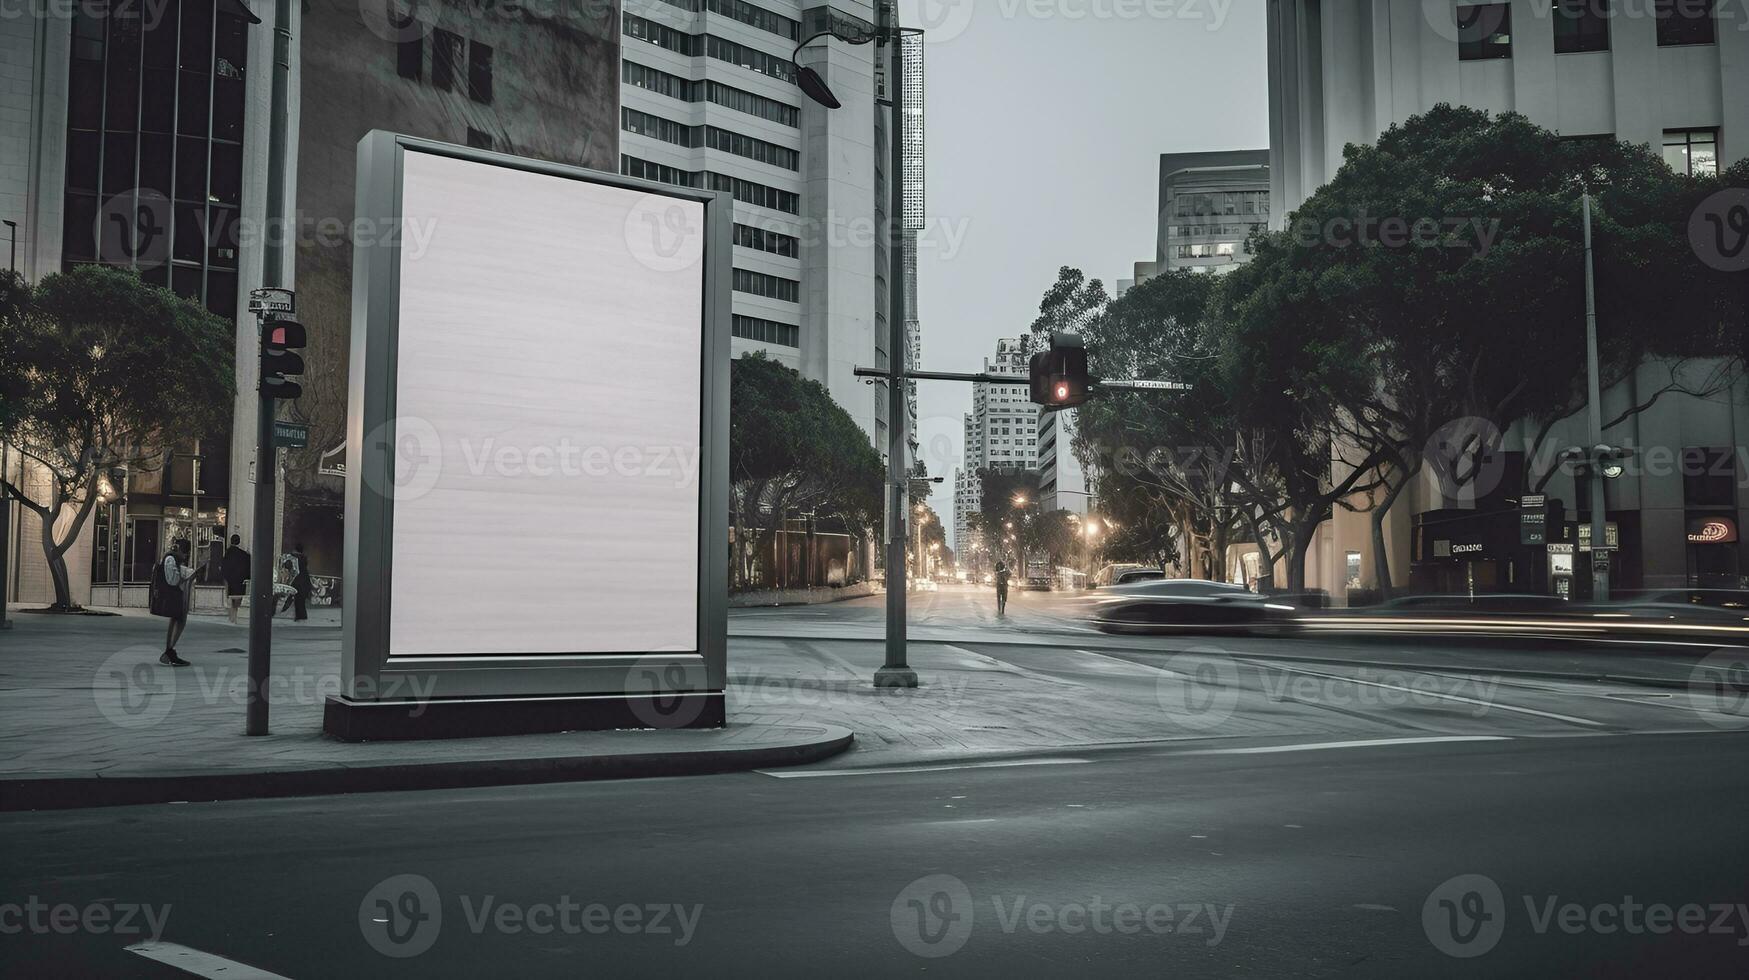 billboard blank for outdoor advertising poster on city street. photo